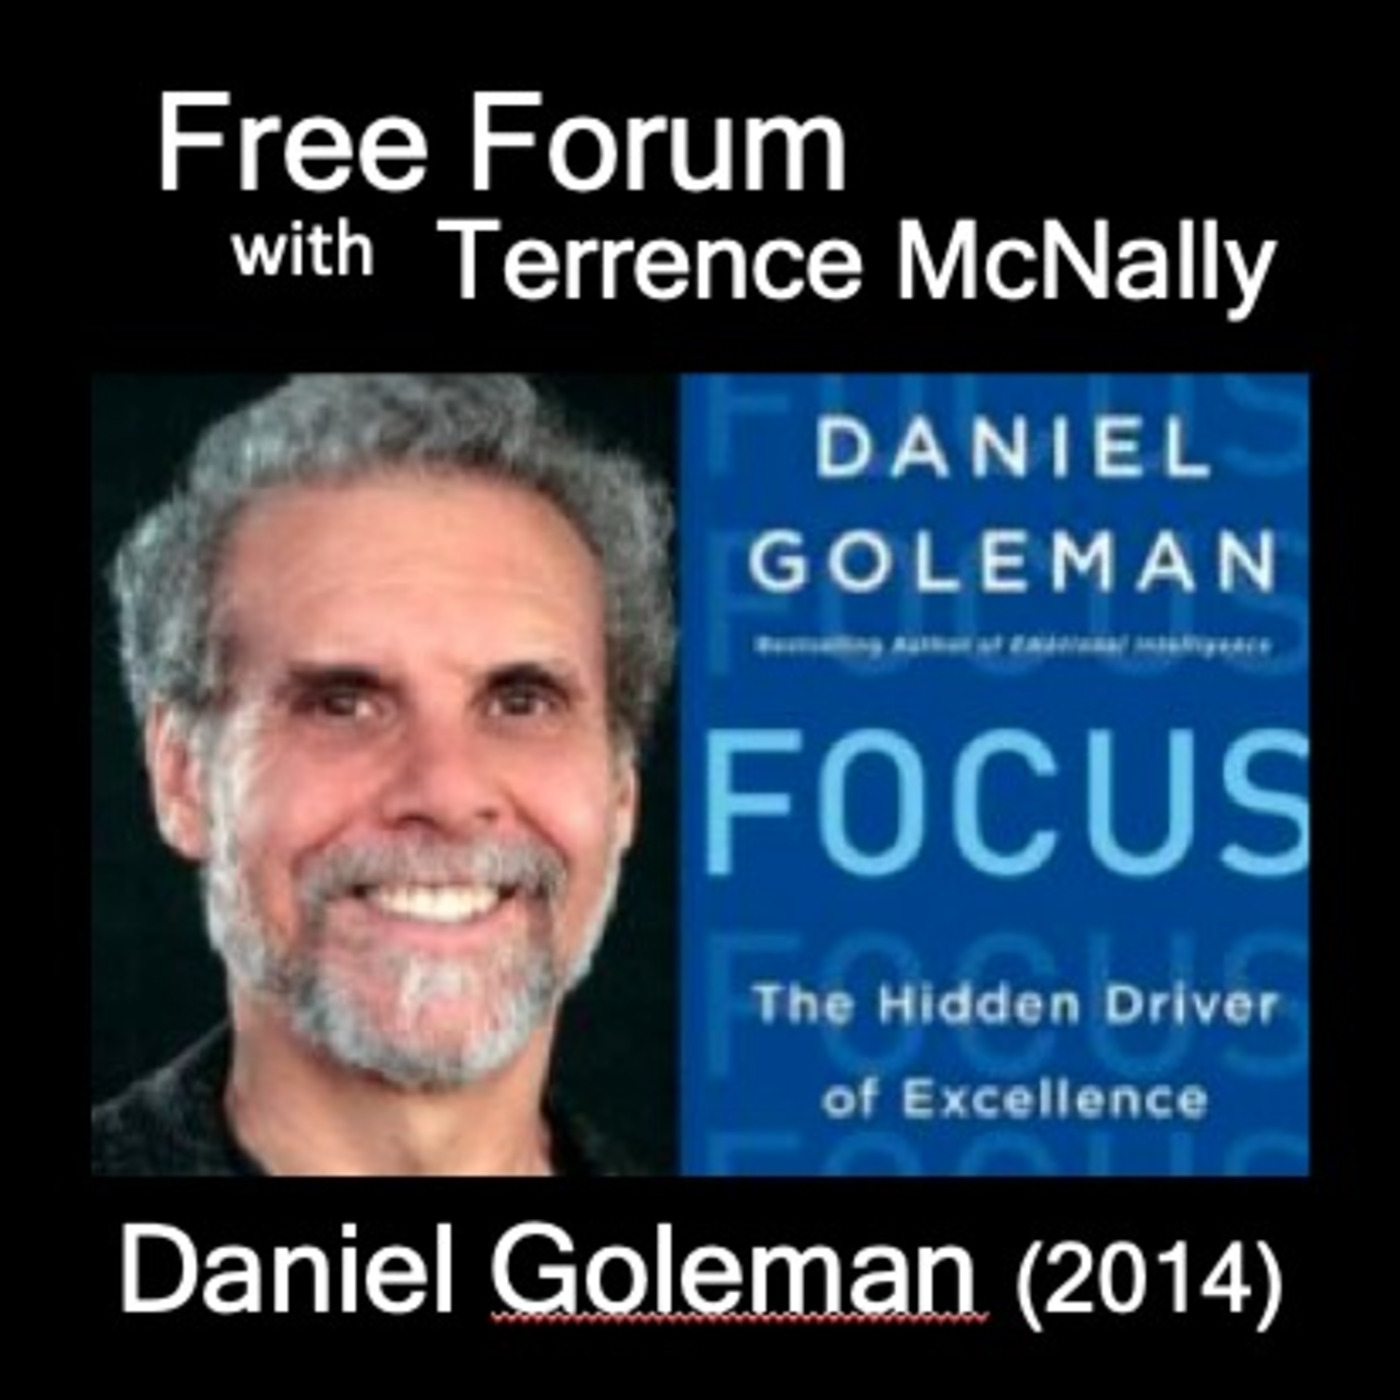 Episode 495: DANIEL GOLEMAN, Focus: The Hidden Driver of Excellence - The critical skill of attention